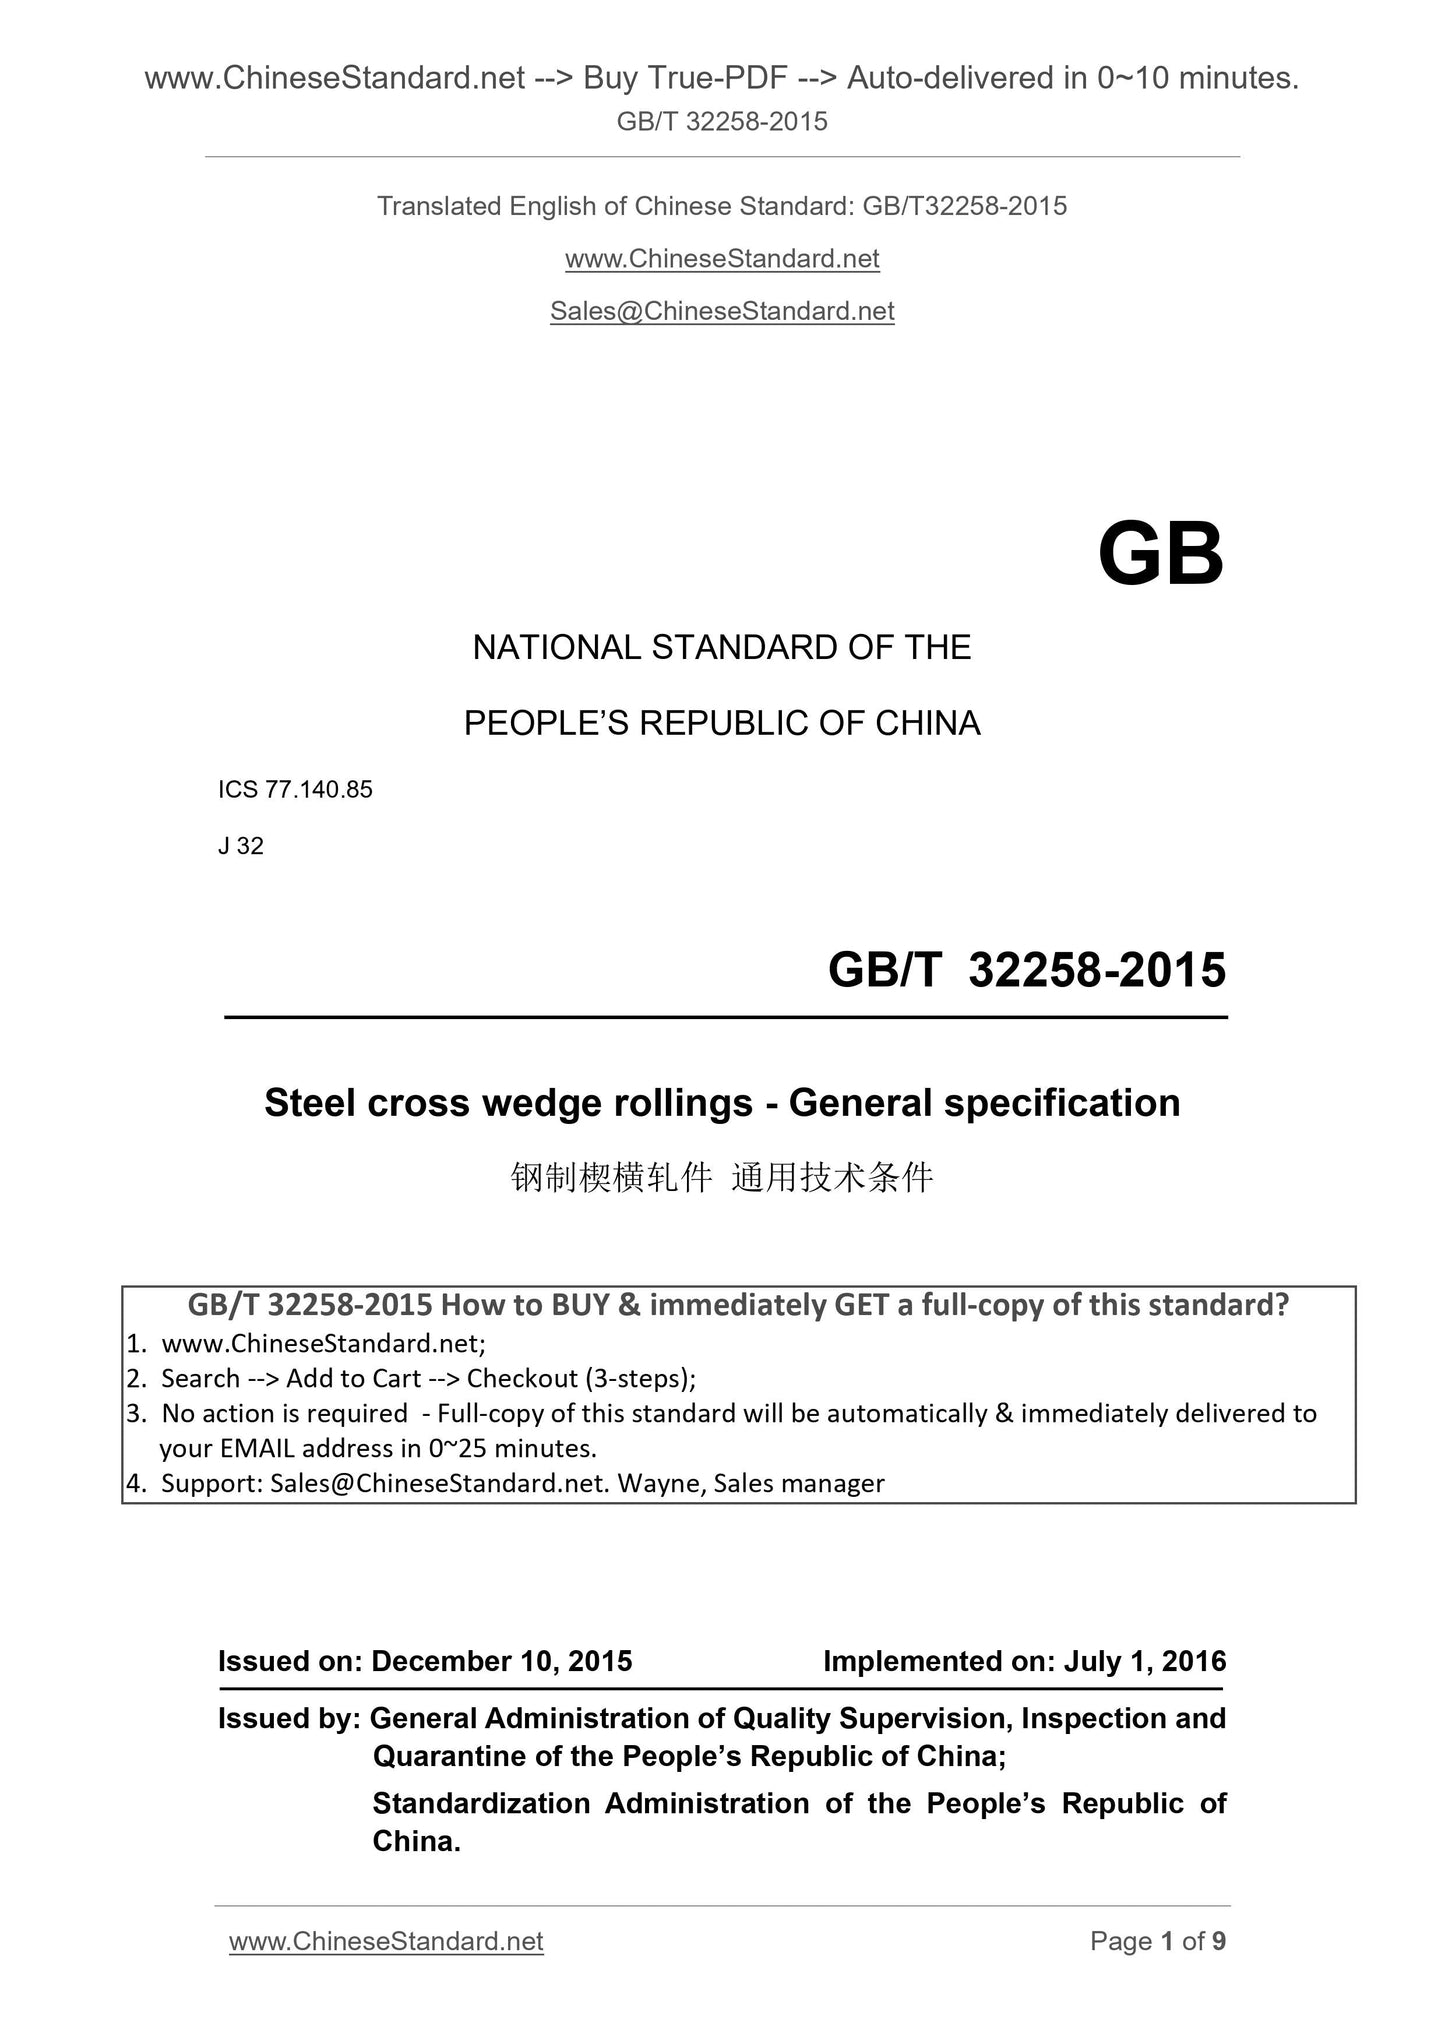 GB/T 32258-2015 Page 1